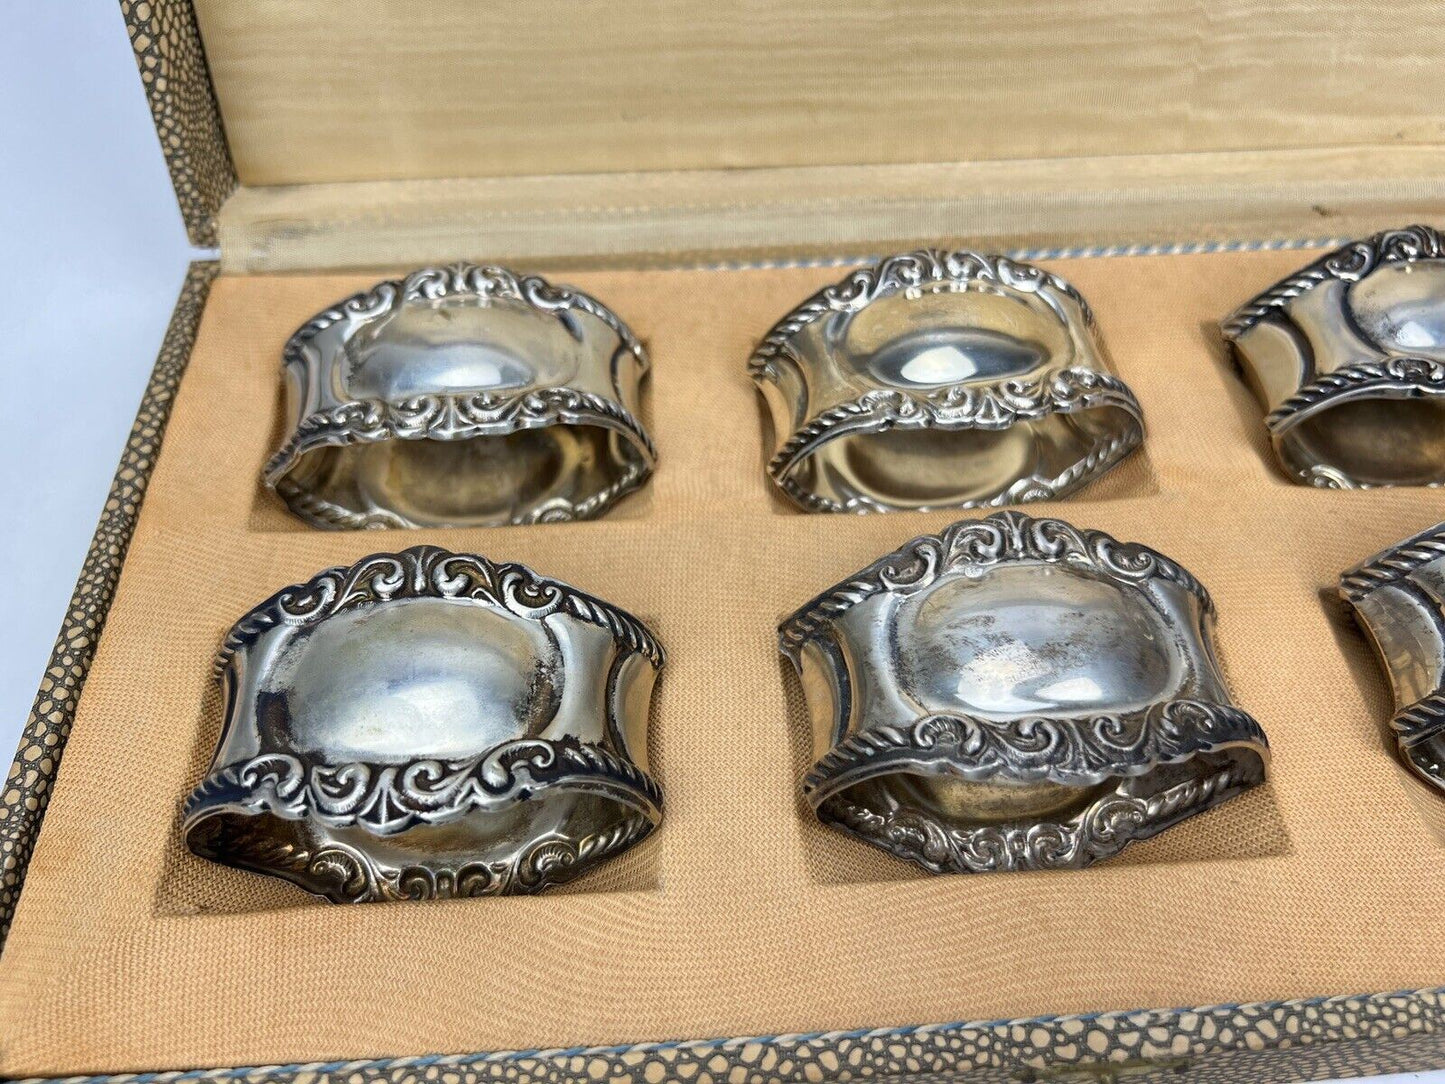 Antique Boxed Set of 6 ARGENTO 800 Italian SILVER Repousse Baroque Napkin Rings